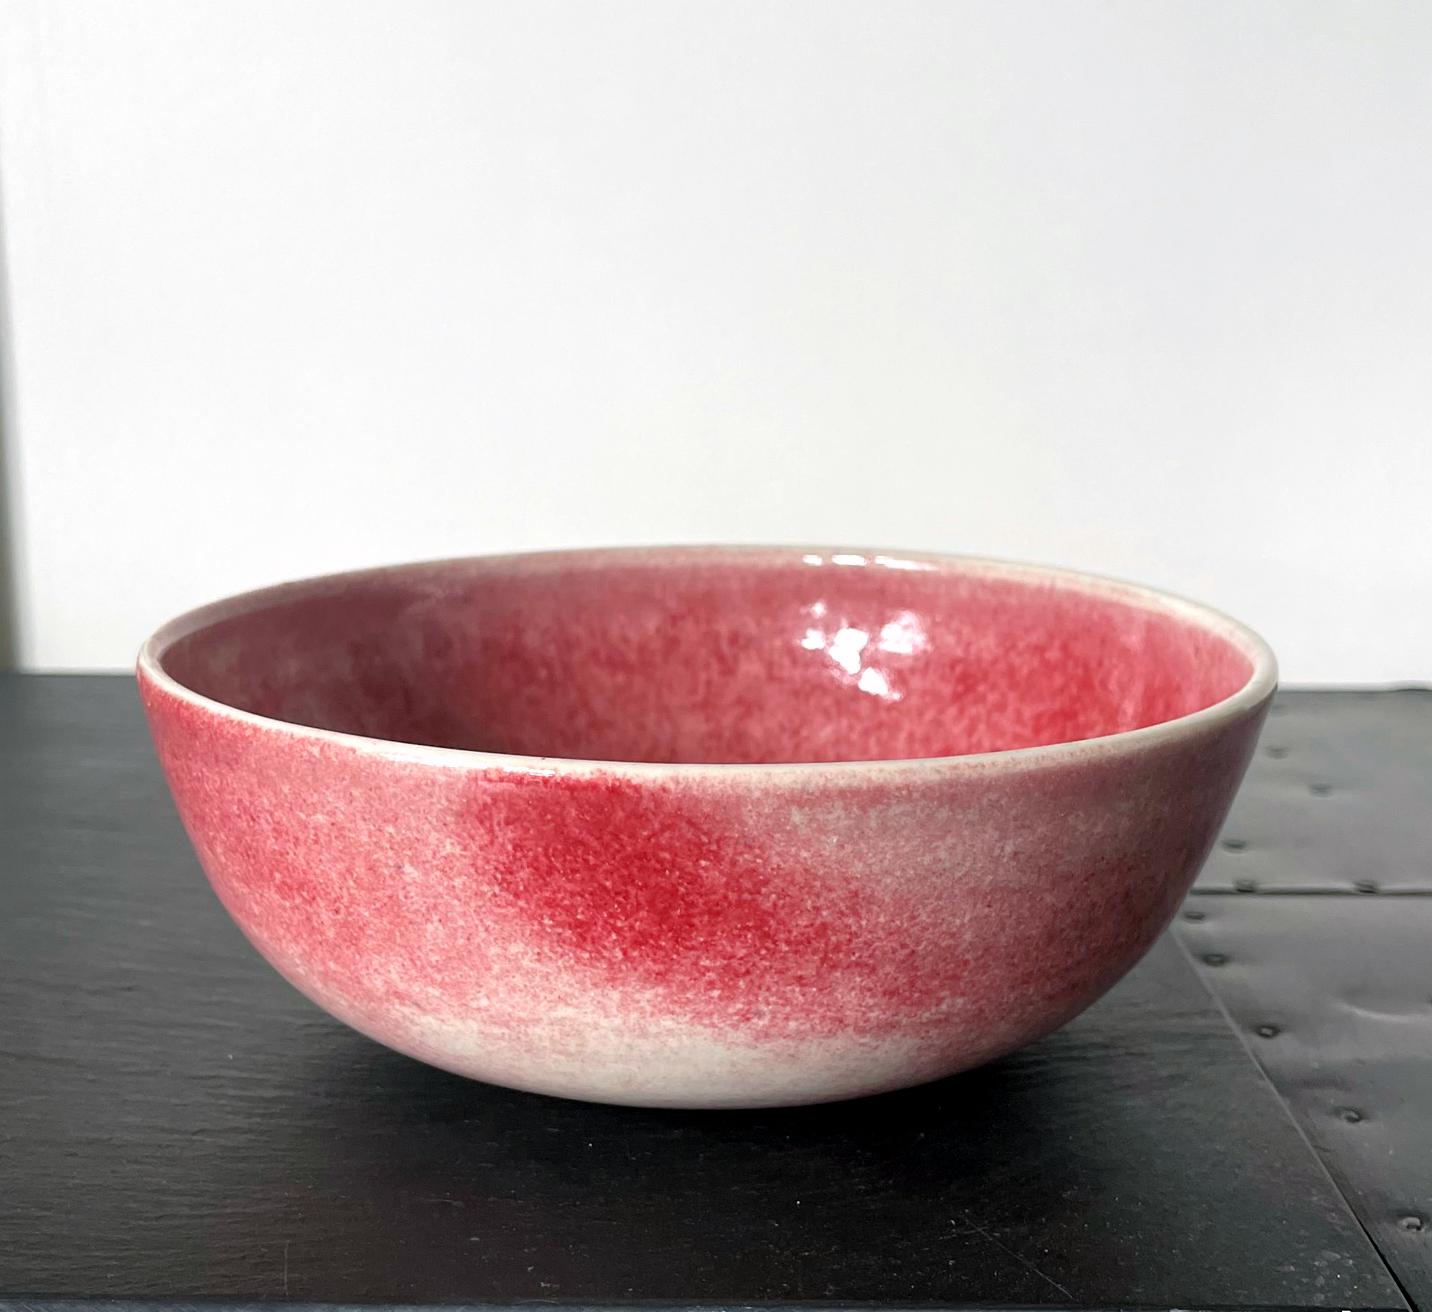 An early ceramic round bowl with a flat foot ring studio crafted by Brother Thomas Bezanson (1929-2007) circa 1970-80s. Covered in a brilliant free form red glaze on white background, the bowl has the root of its archetype in Chinese ceramic and the